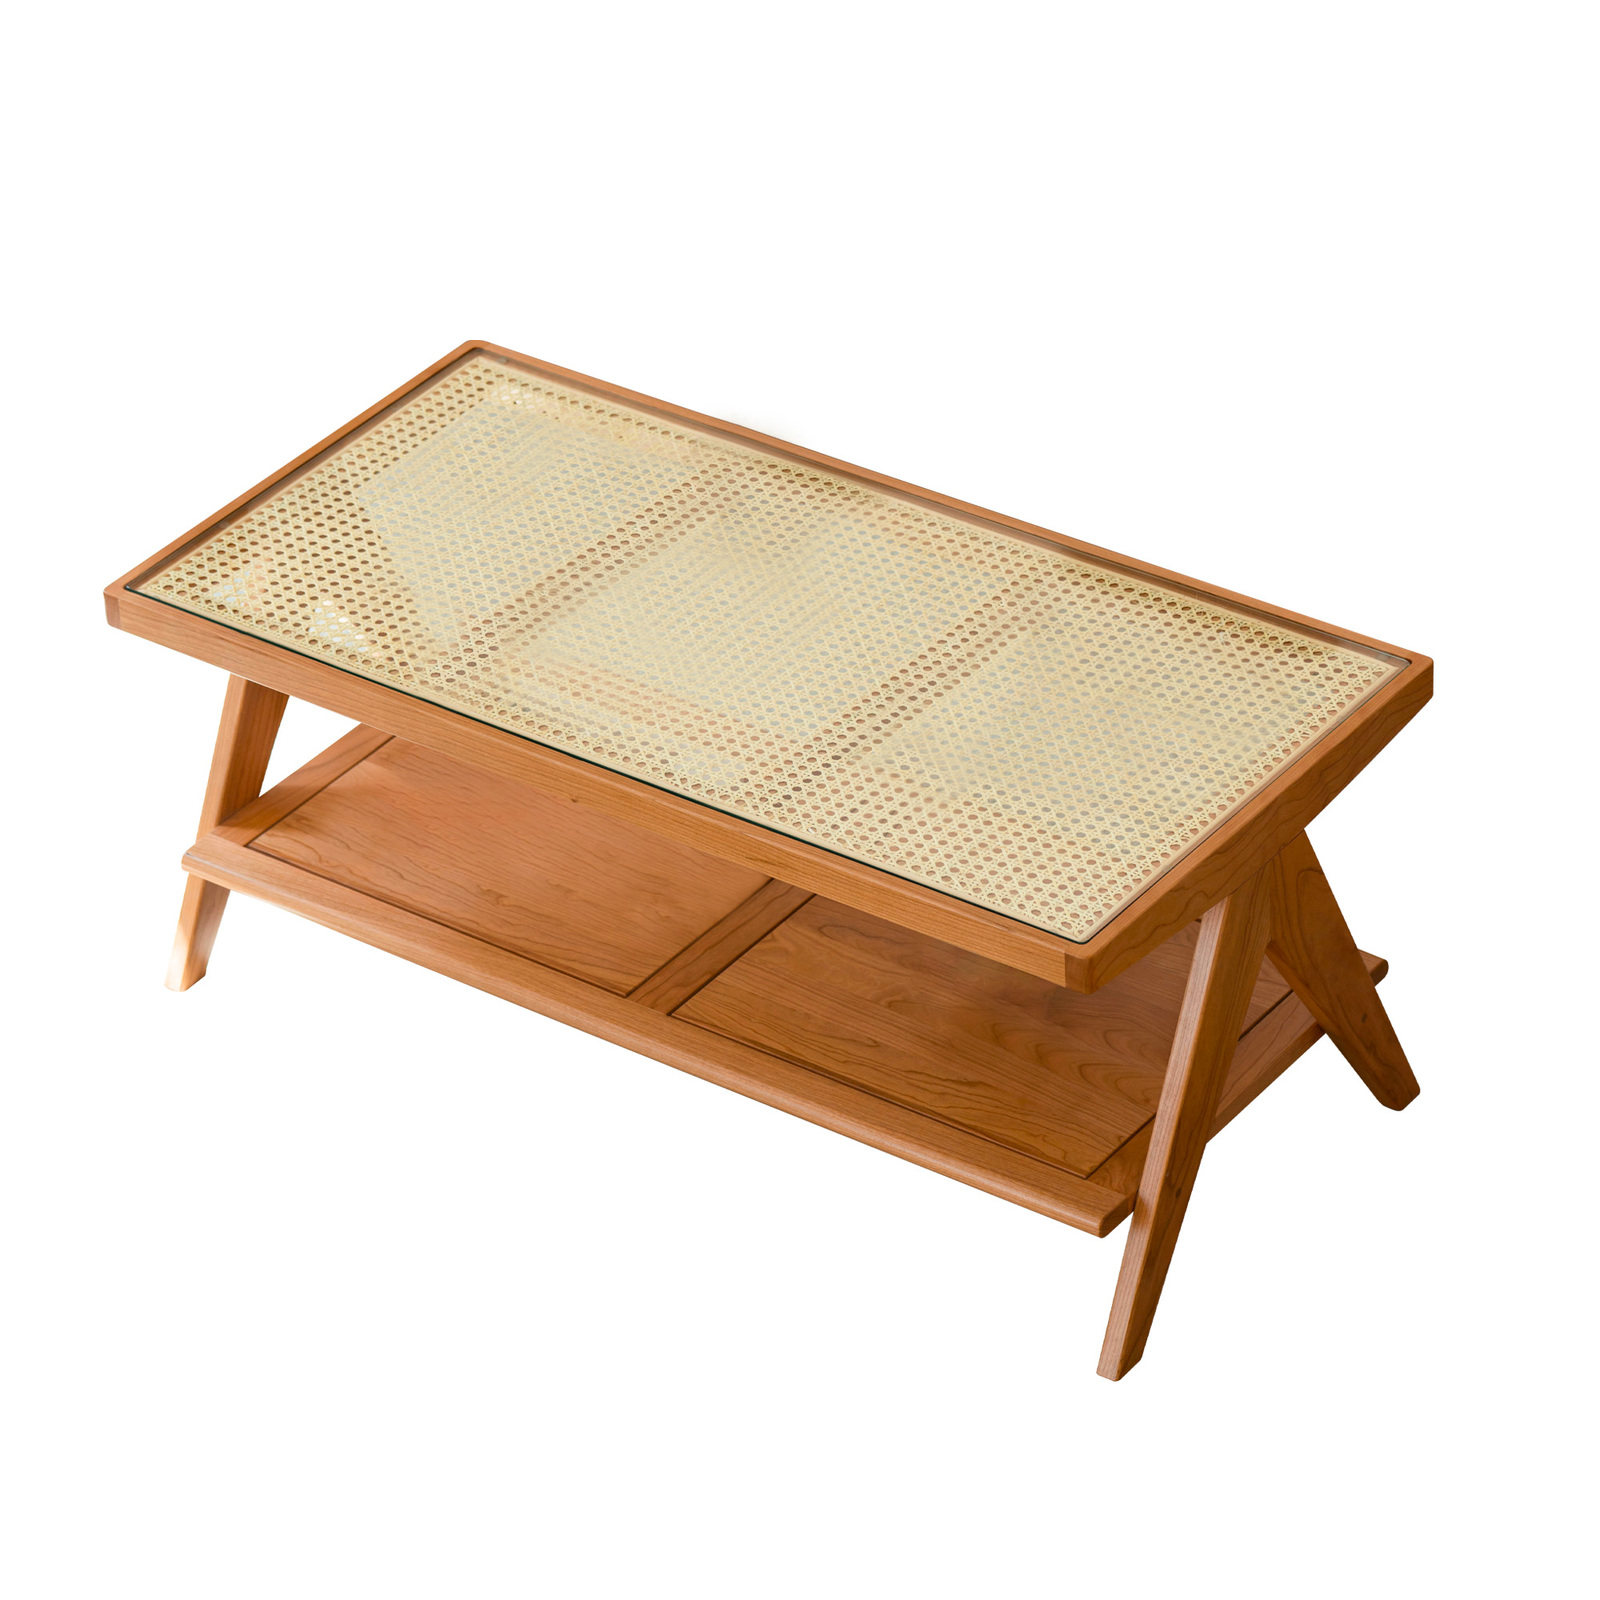 American Cherry Wood Coffee Table Modern Wooden Tables, Rattan Top Center Table For Living Room